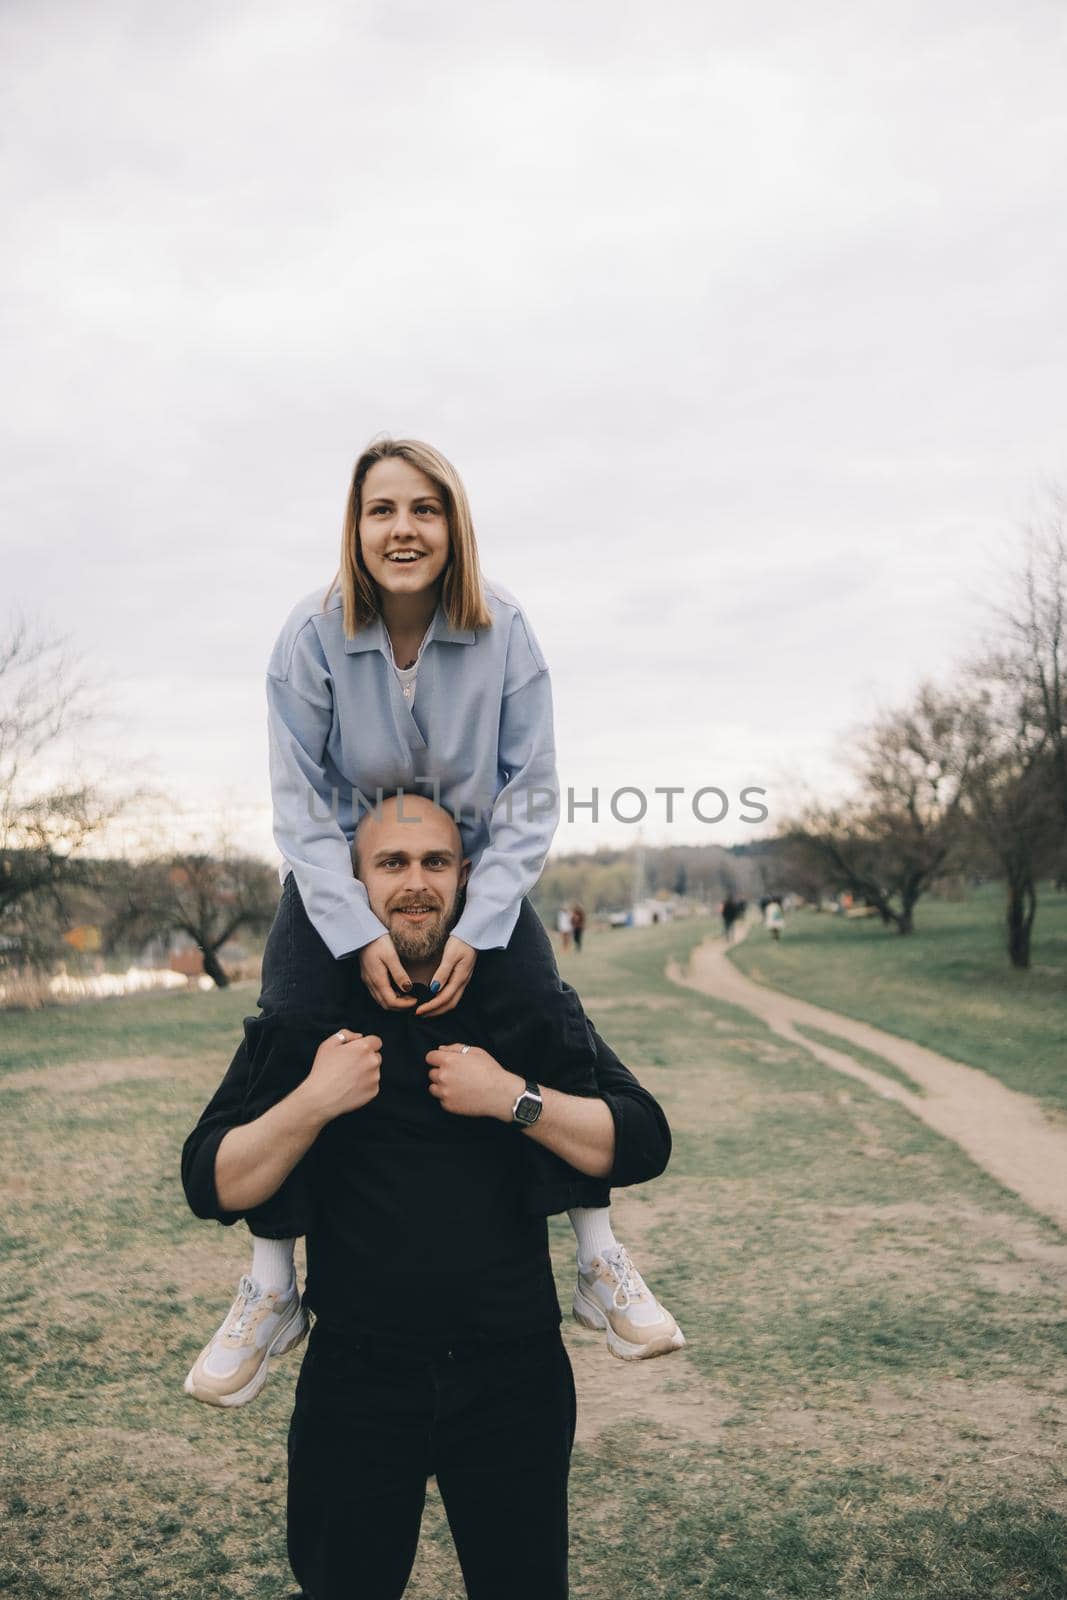 man carries a woman in his arms in the park and they have fun and happy